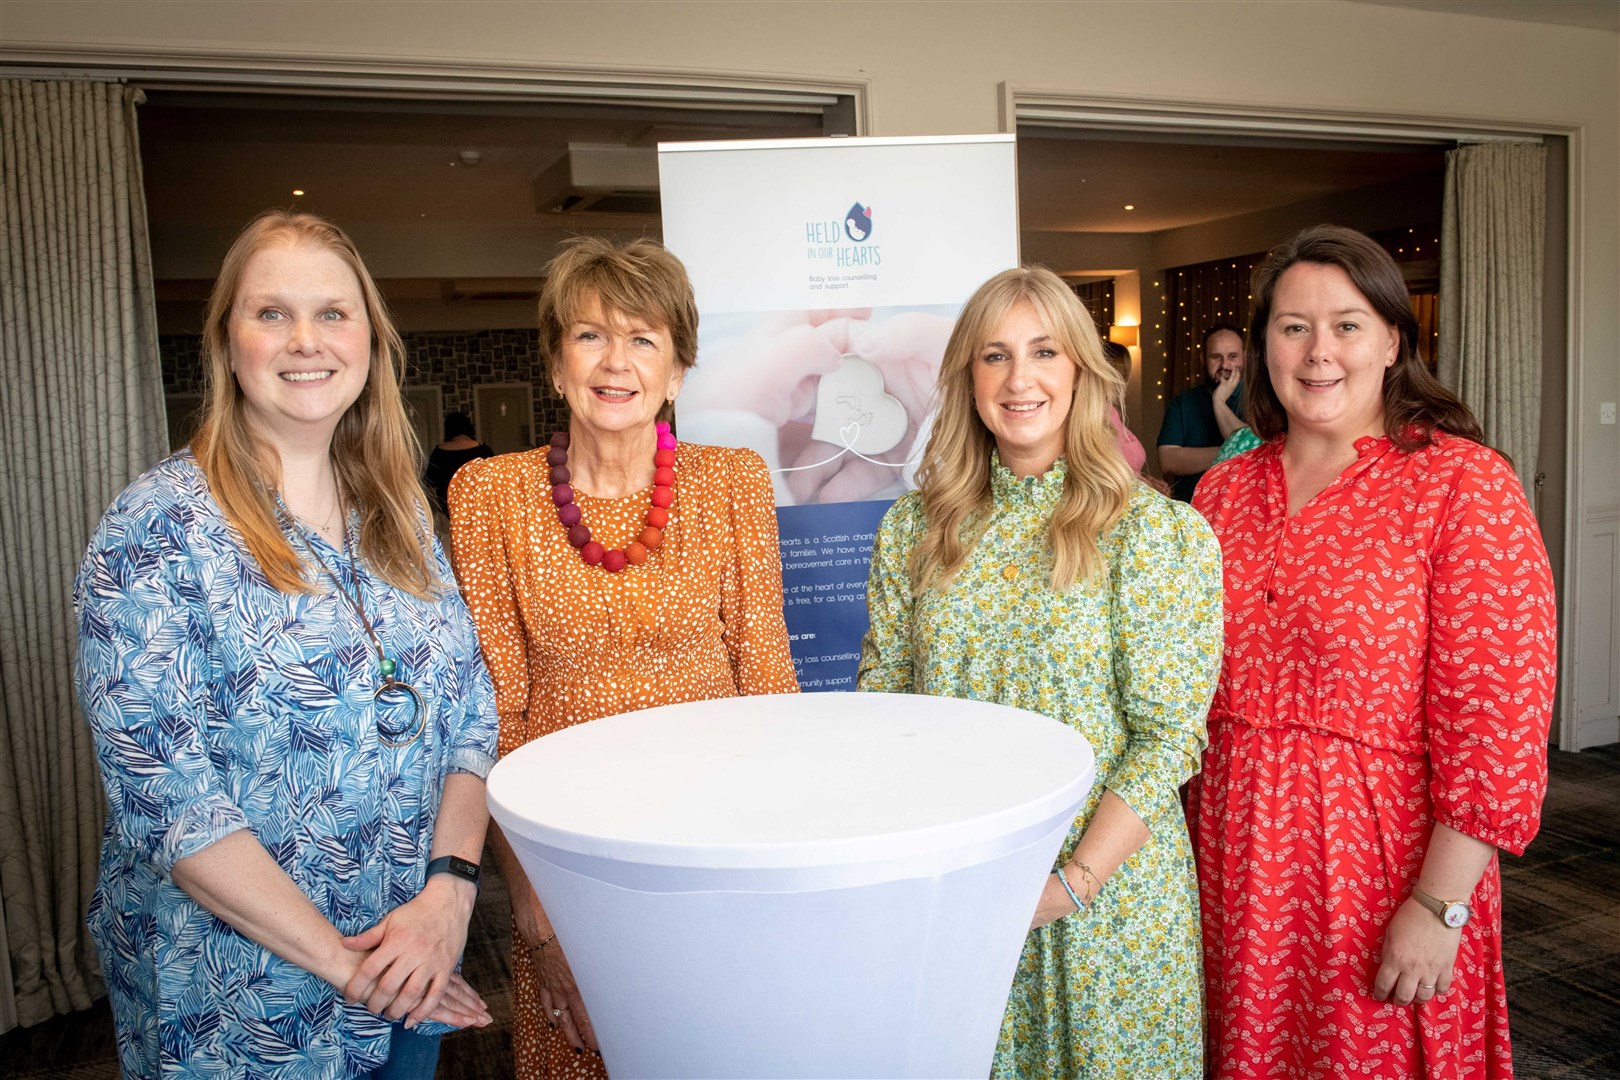 Victoria Erasmus, owner of Glen Mhor Hotel, HITA director Marina Huggett, Nicola Welsh chief executive of Held In Our Hearts and the charity’s peer supporter and hospital liaison, Lindsay Donaldson. Picture: Callum Mackay